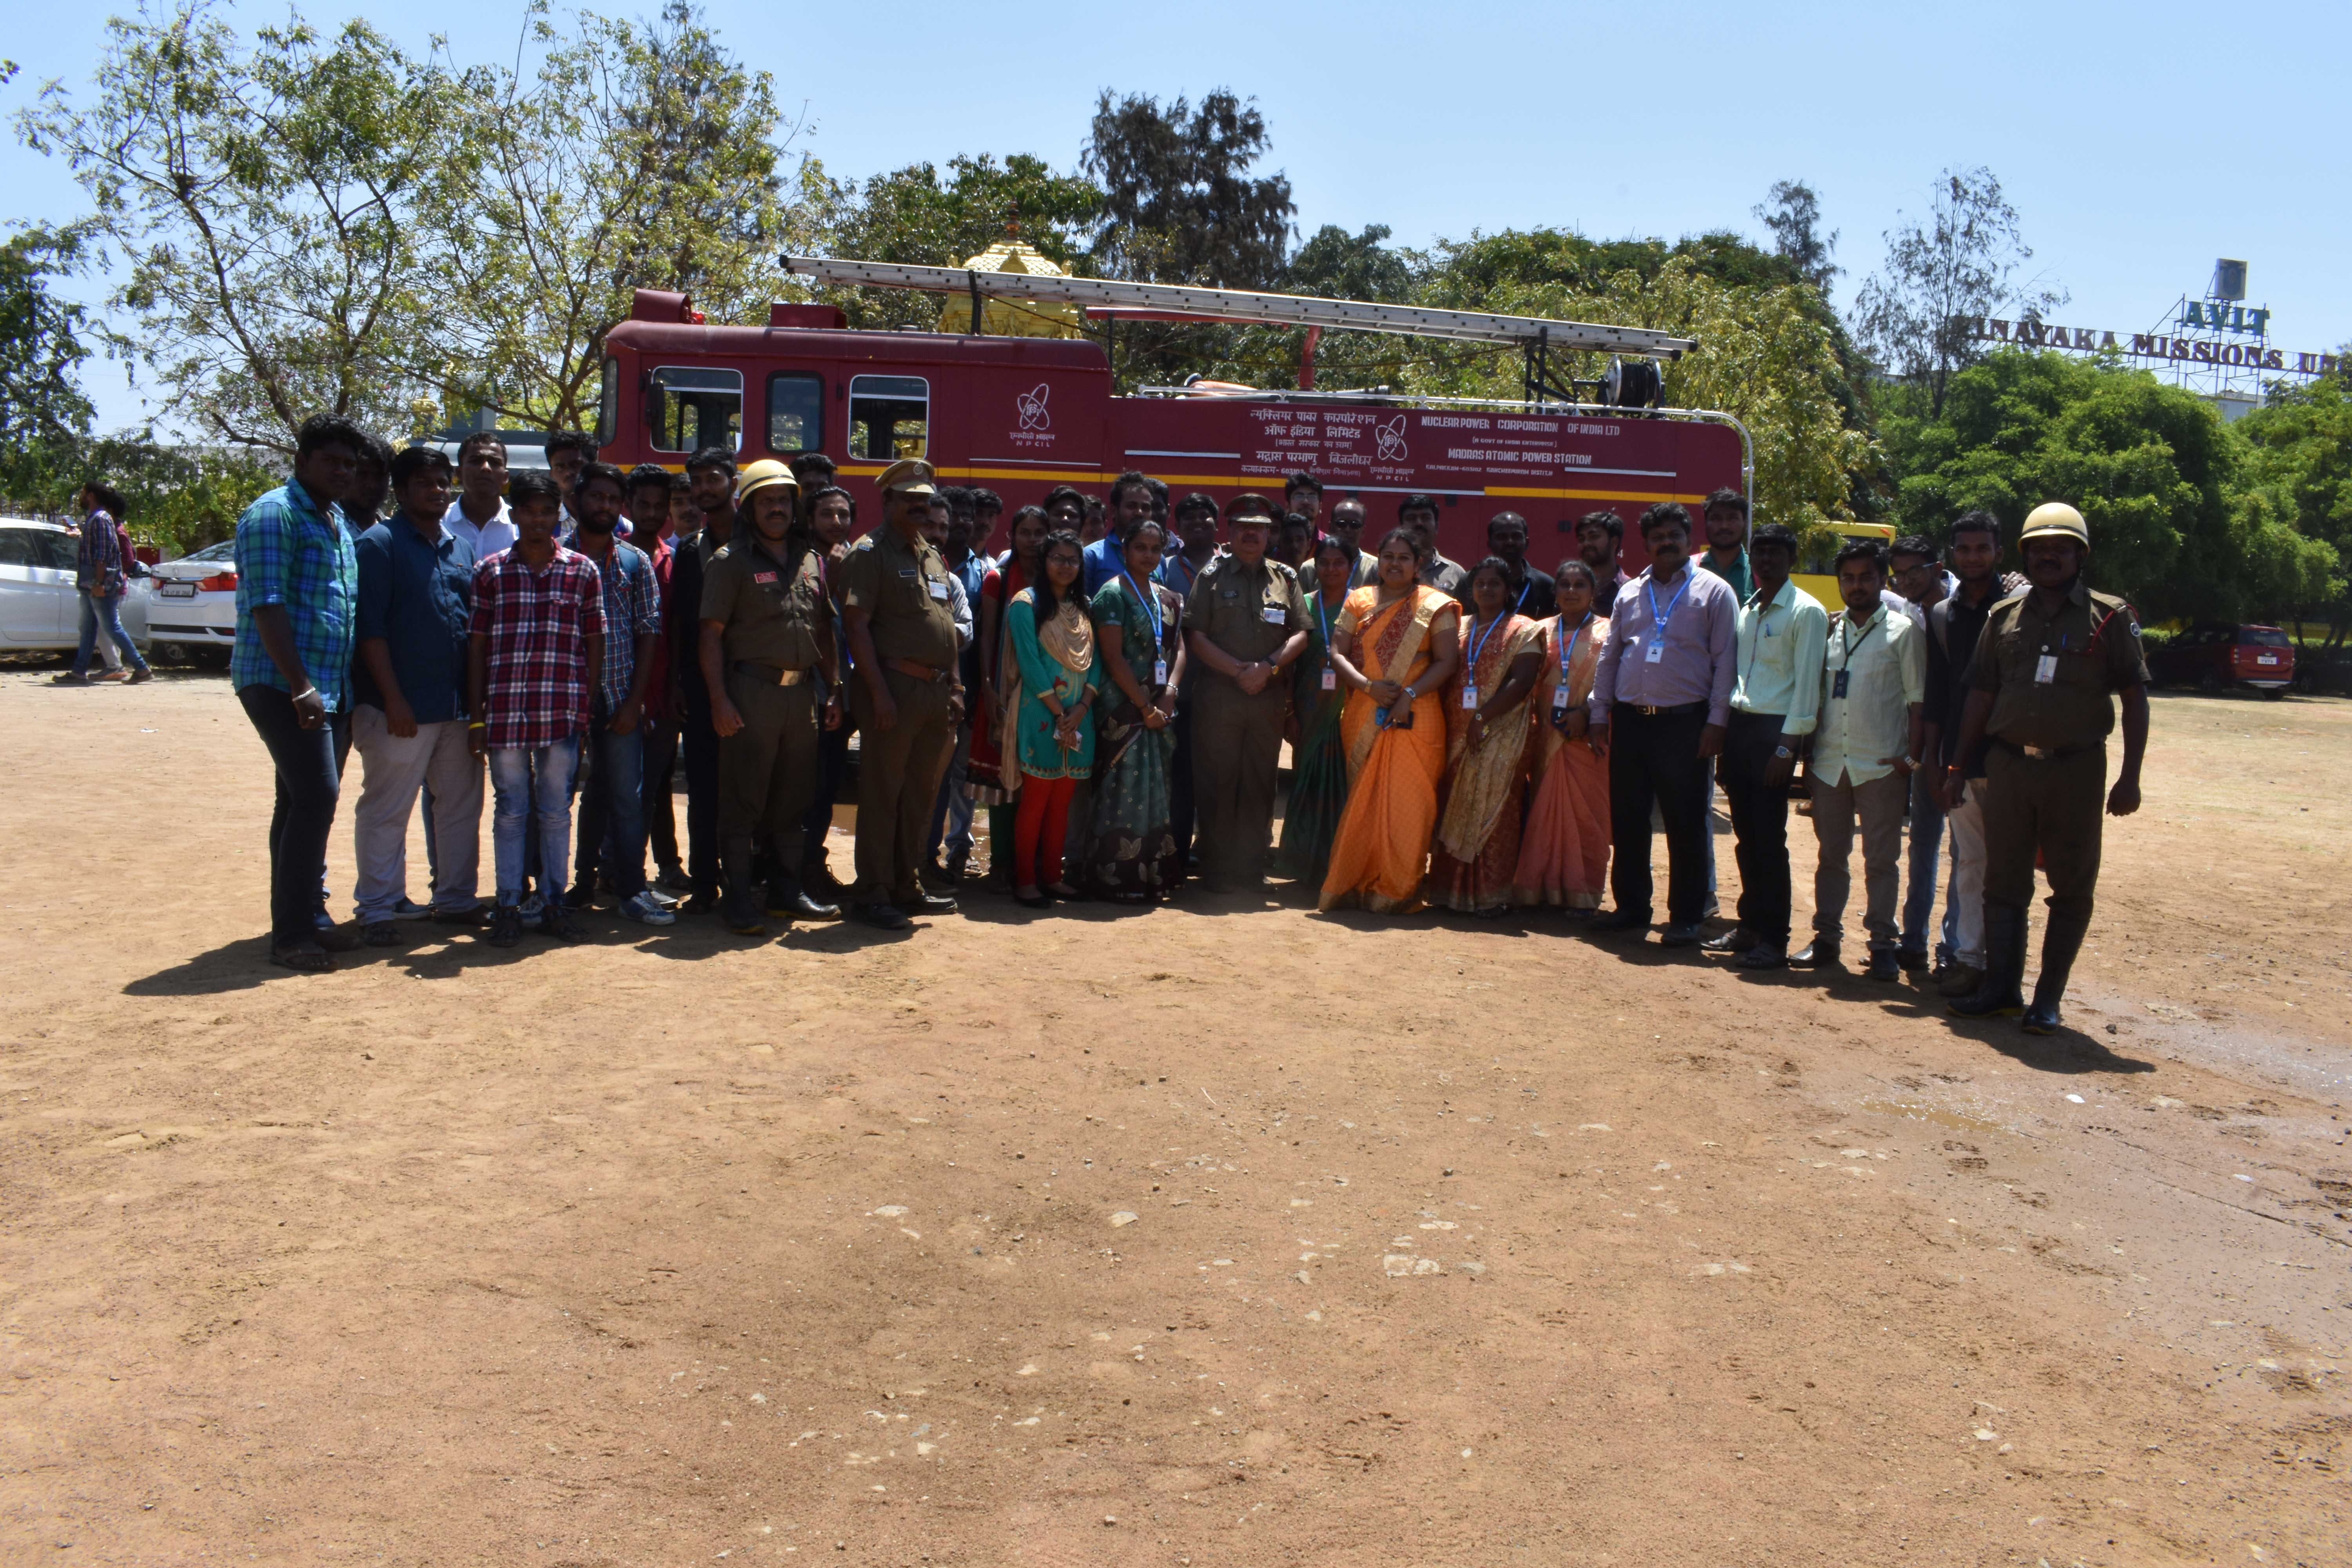 Fire safety programme for AVIT students and faculty members
